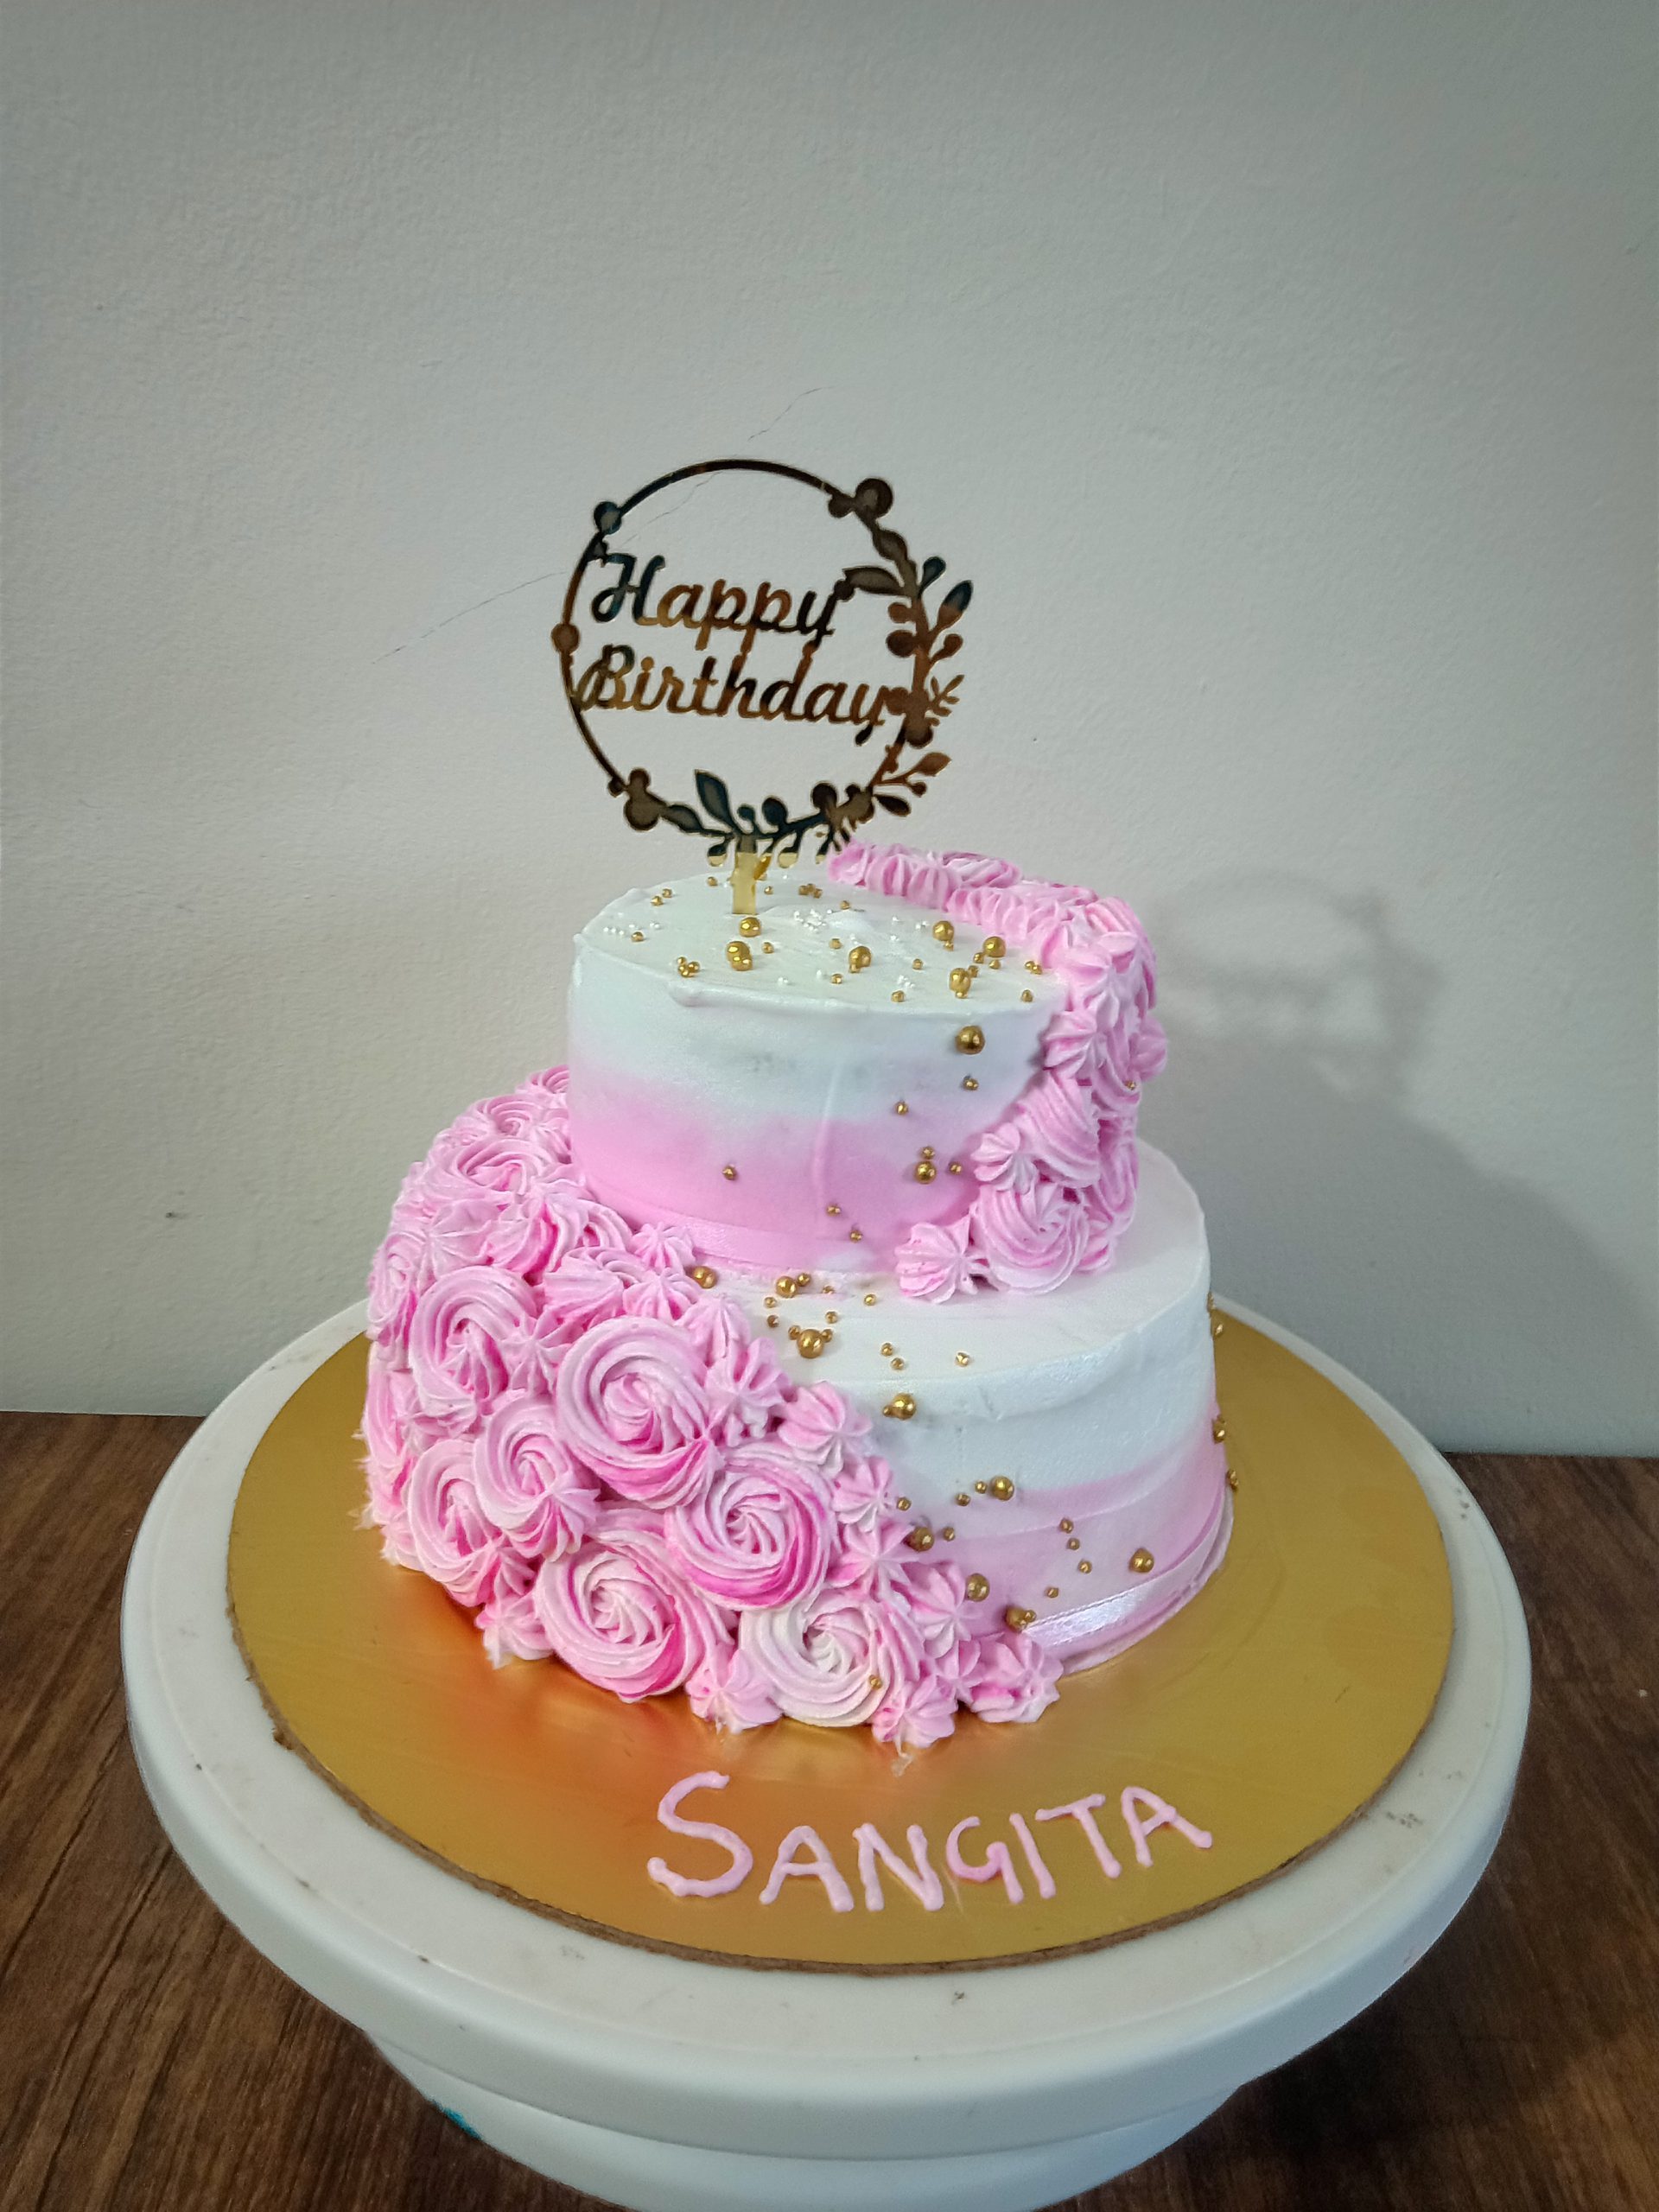 Two Tier Cake Designs, Images, Price Near Me